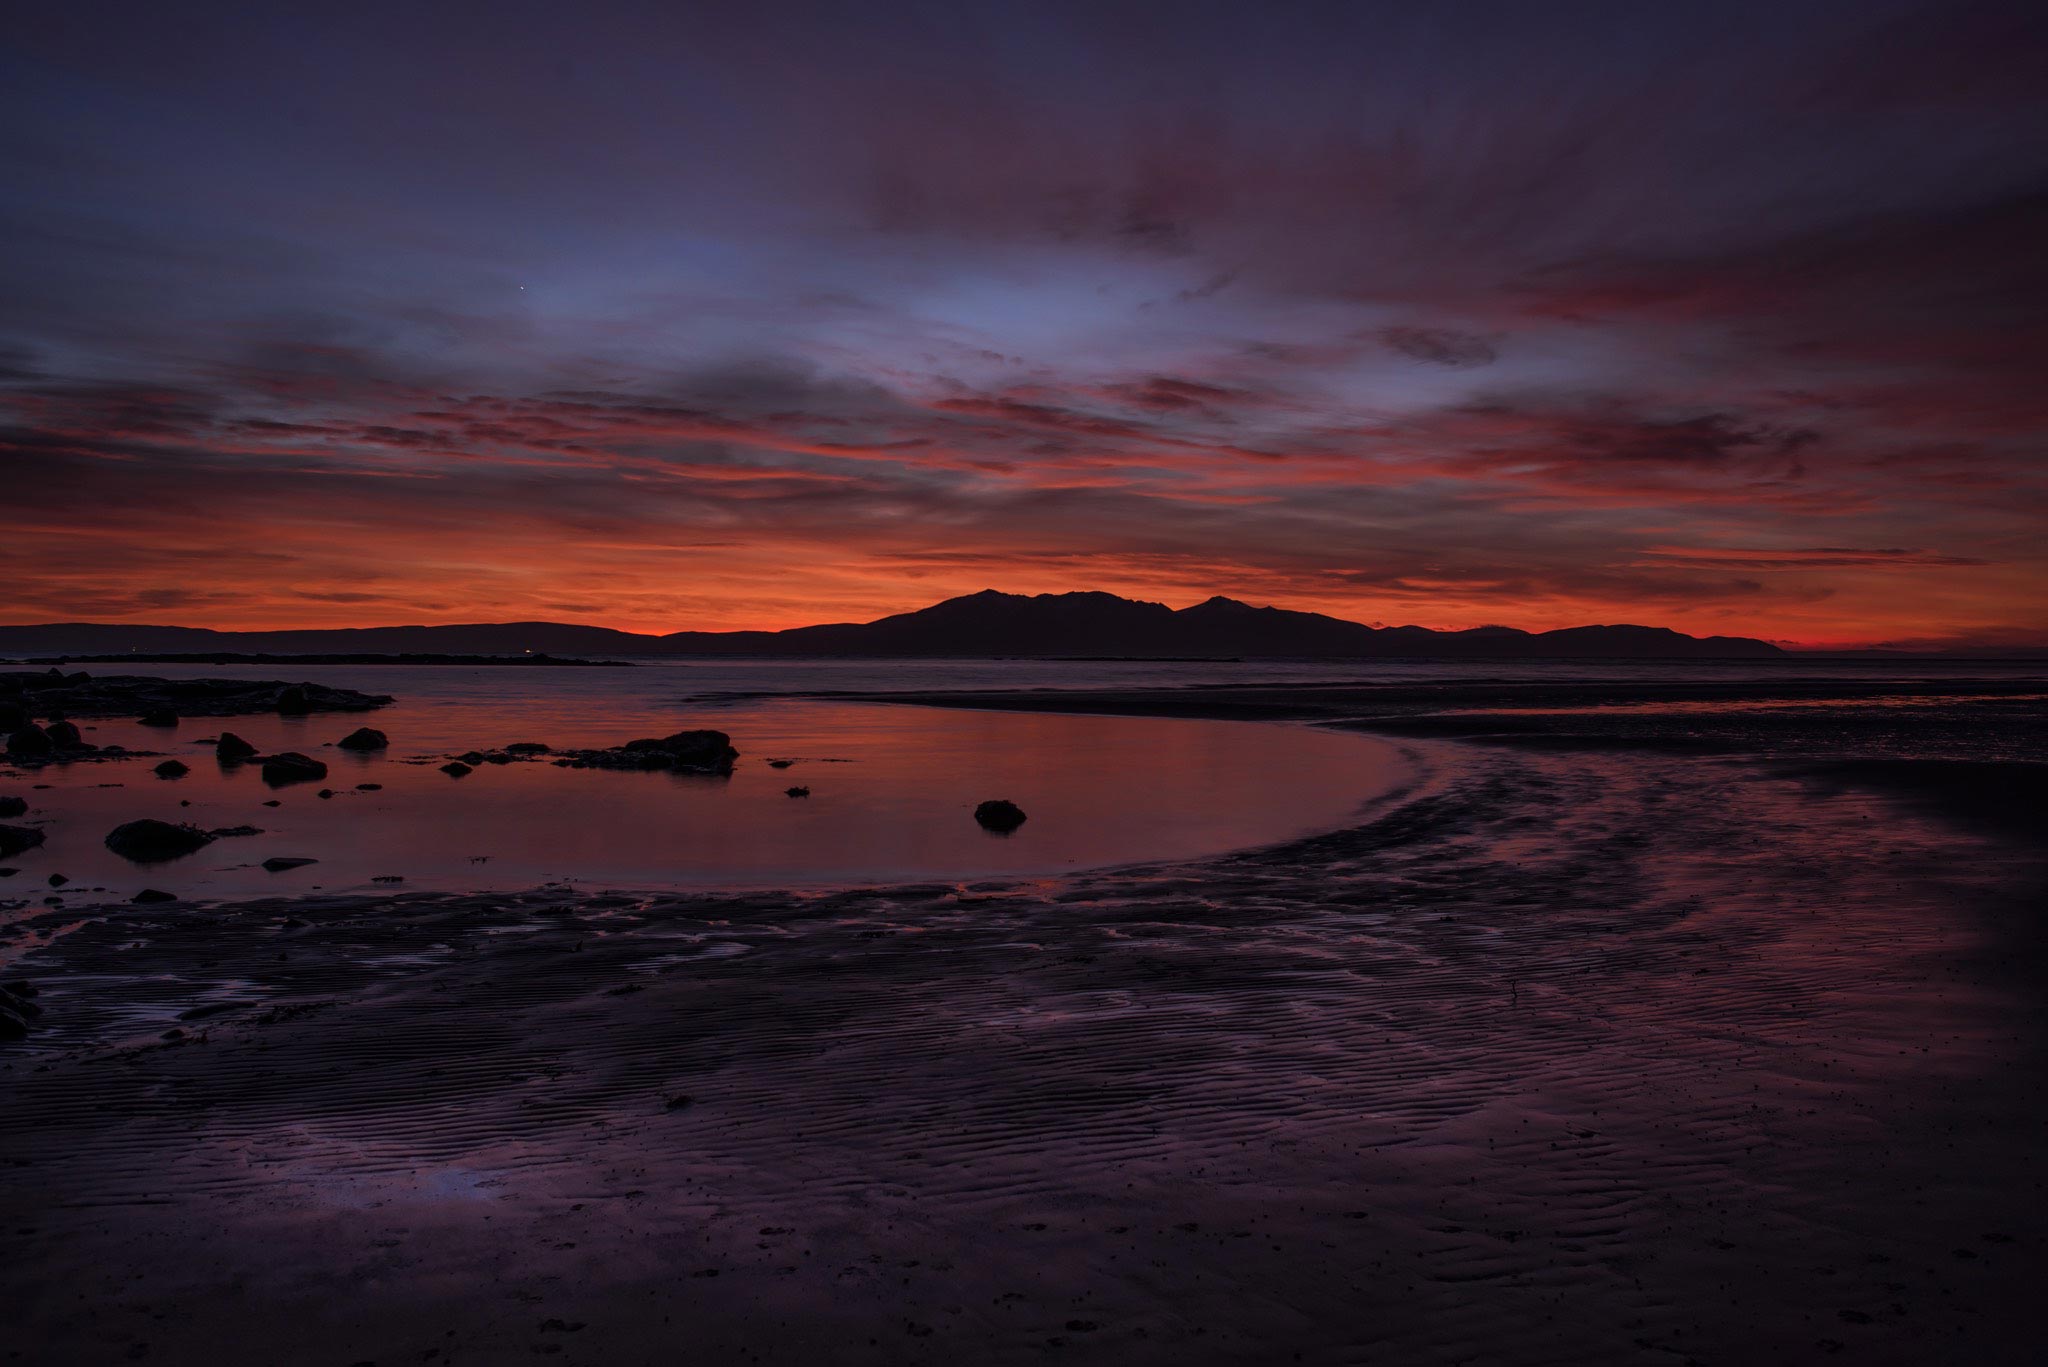 Capture the stunning beauty of West Kilbride Beach in Scotland at sunset, showcasing the ethereal glow of the sky with hues of red and blue. The landscape features the tranquil sea stretching towards the horizon, with the silhouette of Arran Island in the distance. The unique lighting casts a mesmerizing purple hue on the sand and rocks, creating an otherworldly scene.